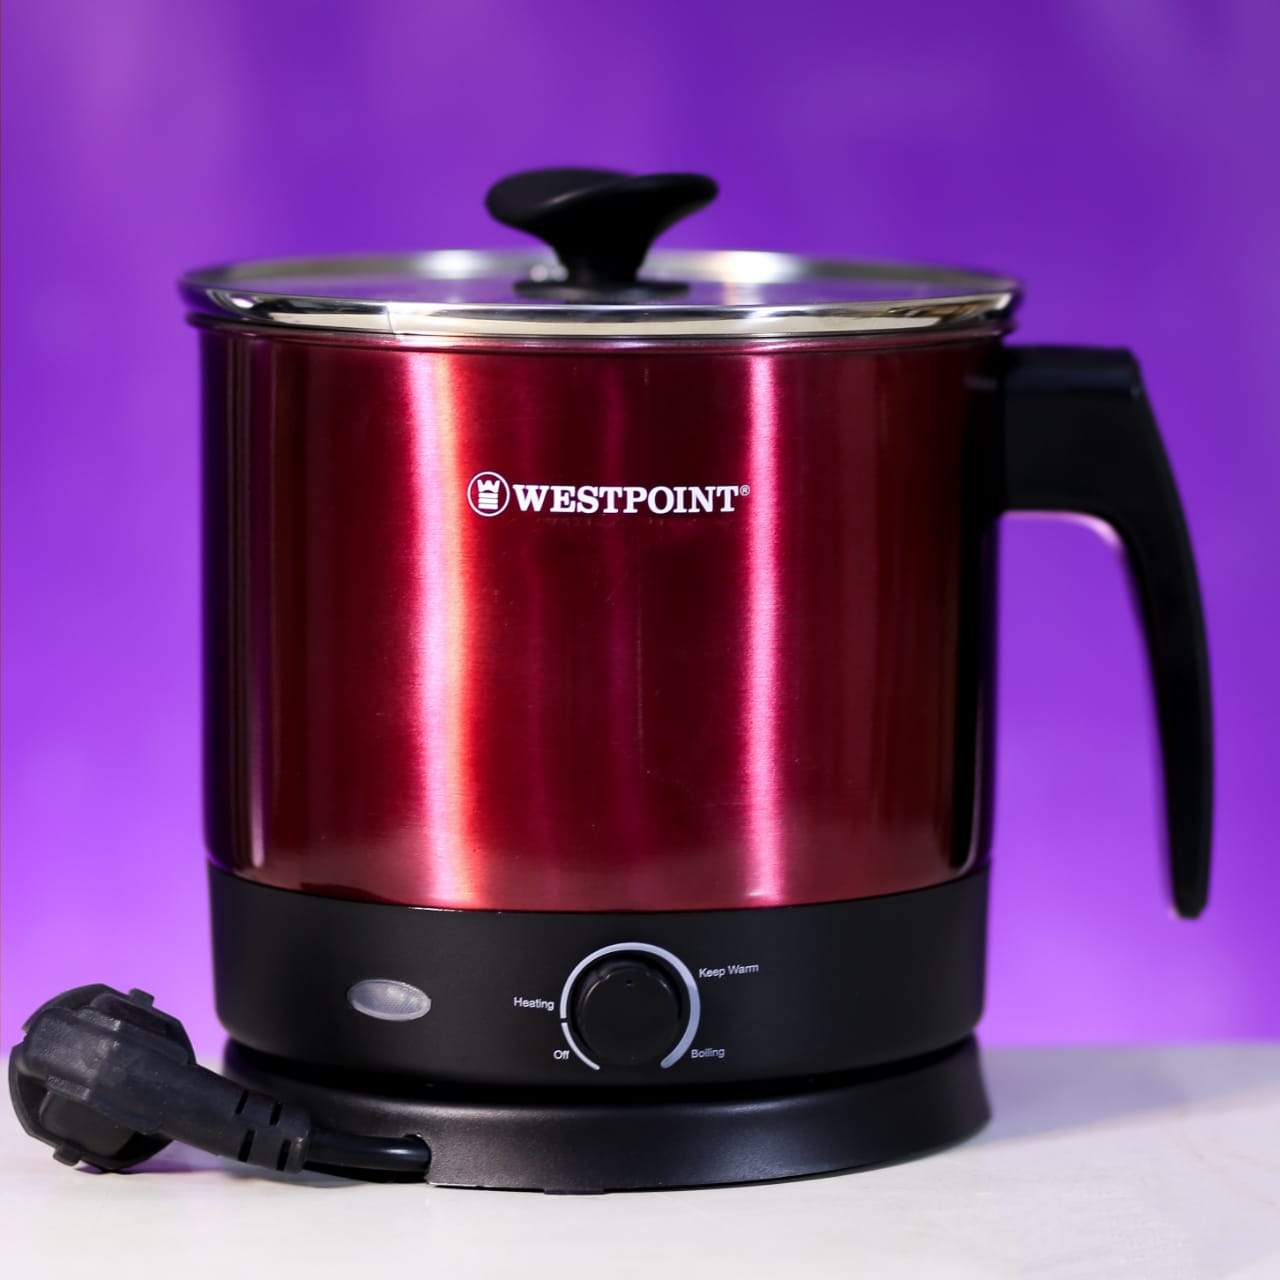 WEST POINT MULTI FUNCTION KETTLE 6175